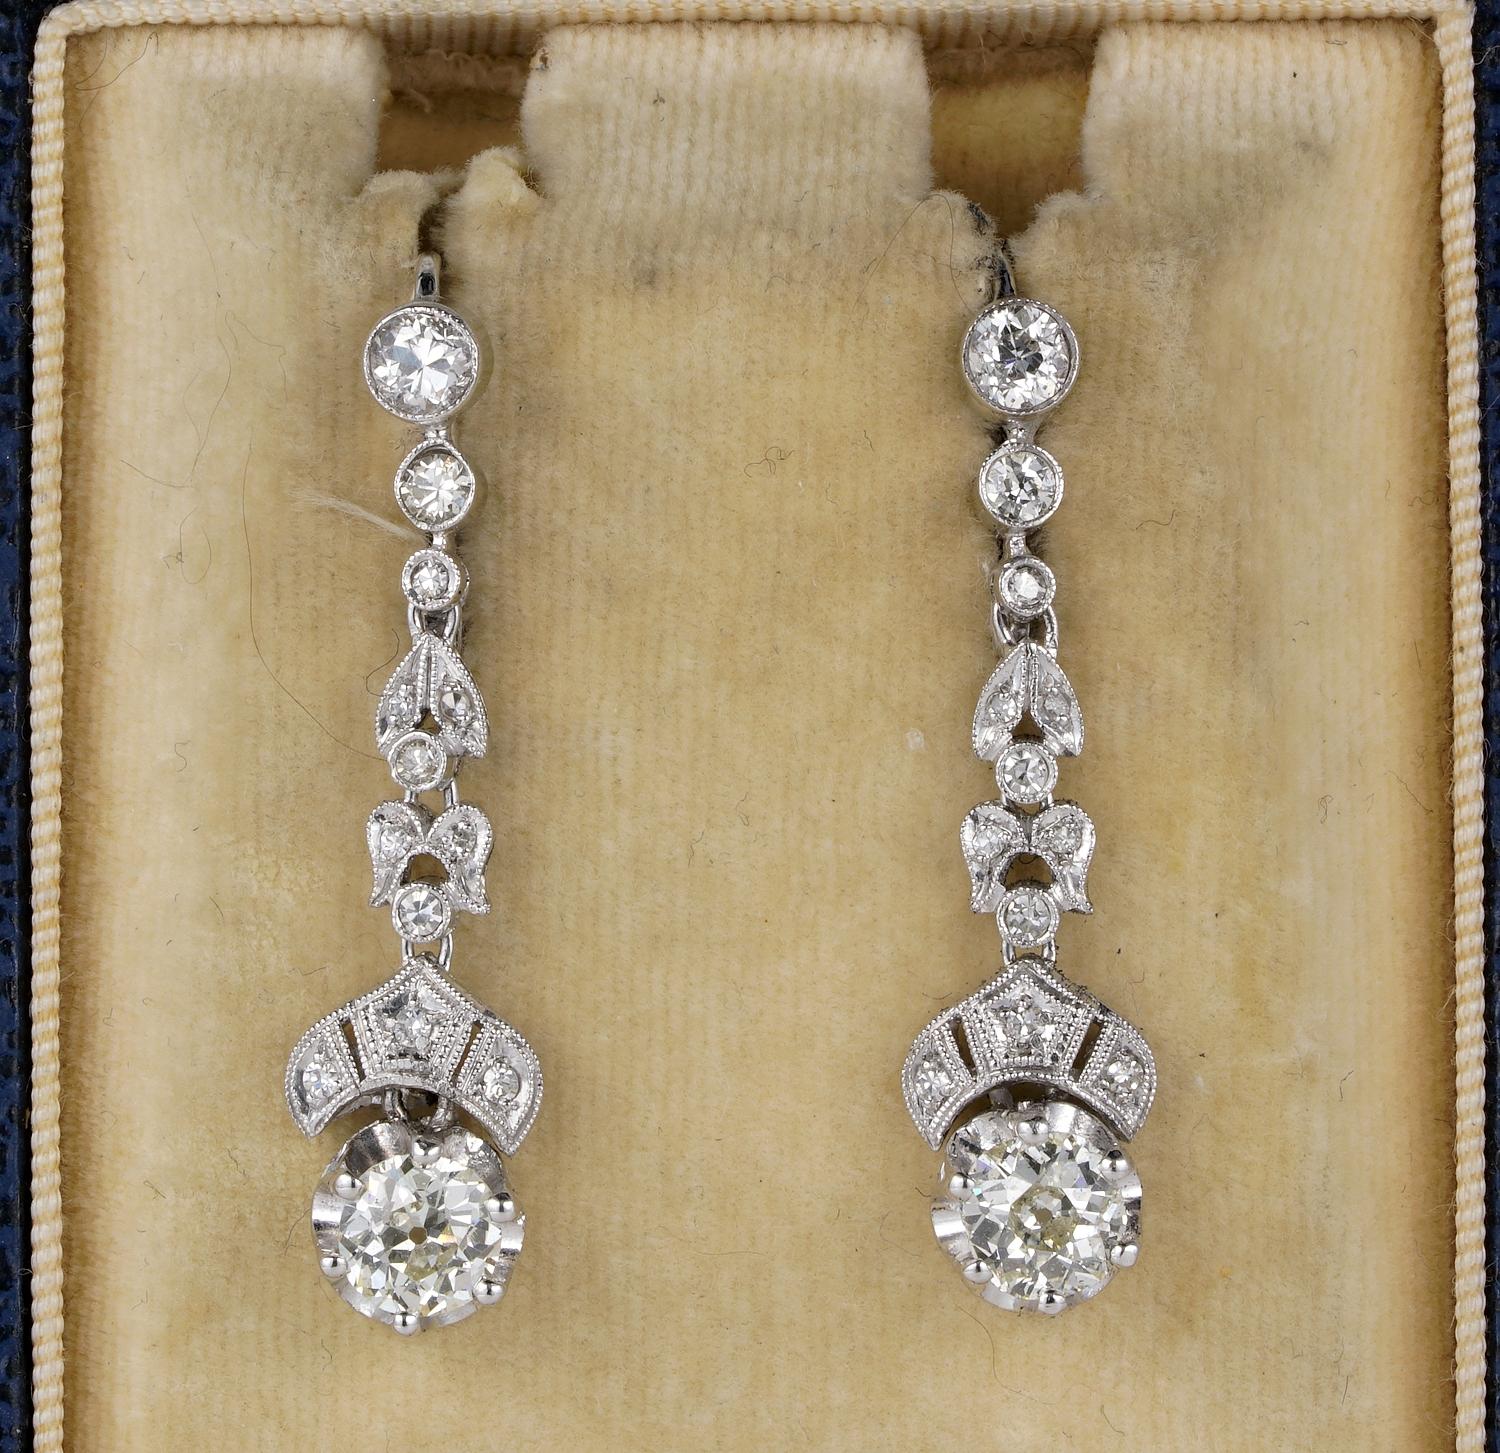 These beautiful swing drop earrings are Art Deco period, 1925 ca
Hand crafted of solid 18 Kt topped by Platinum
Gently mounted in a combination of leaf and lunette design, disposed in a long line of old cut Diamonds, leading to the larger Diamond